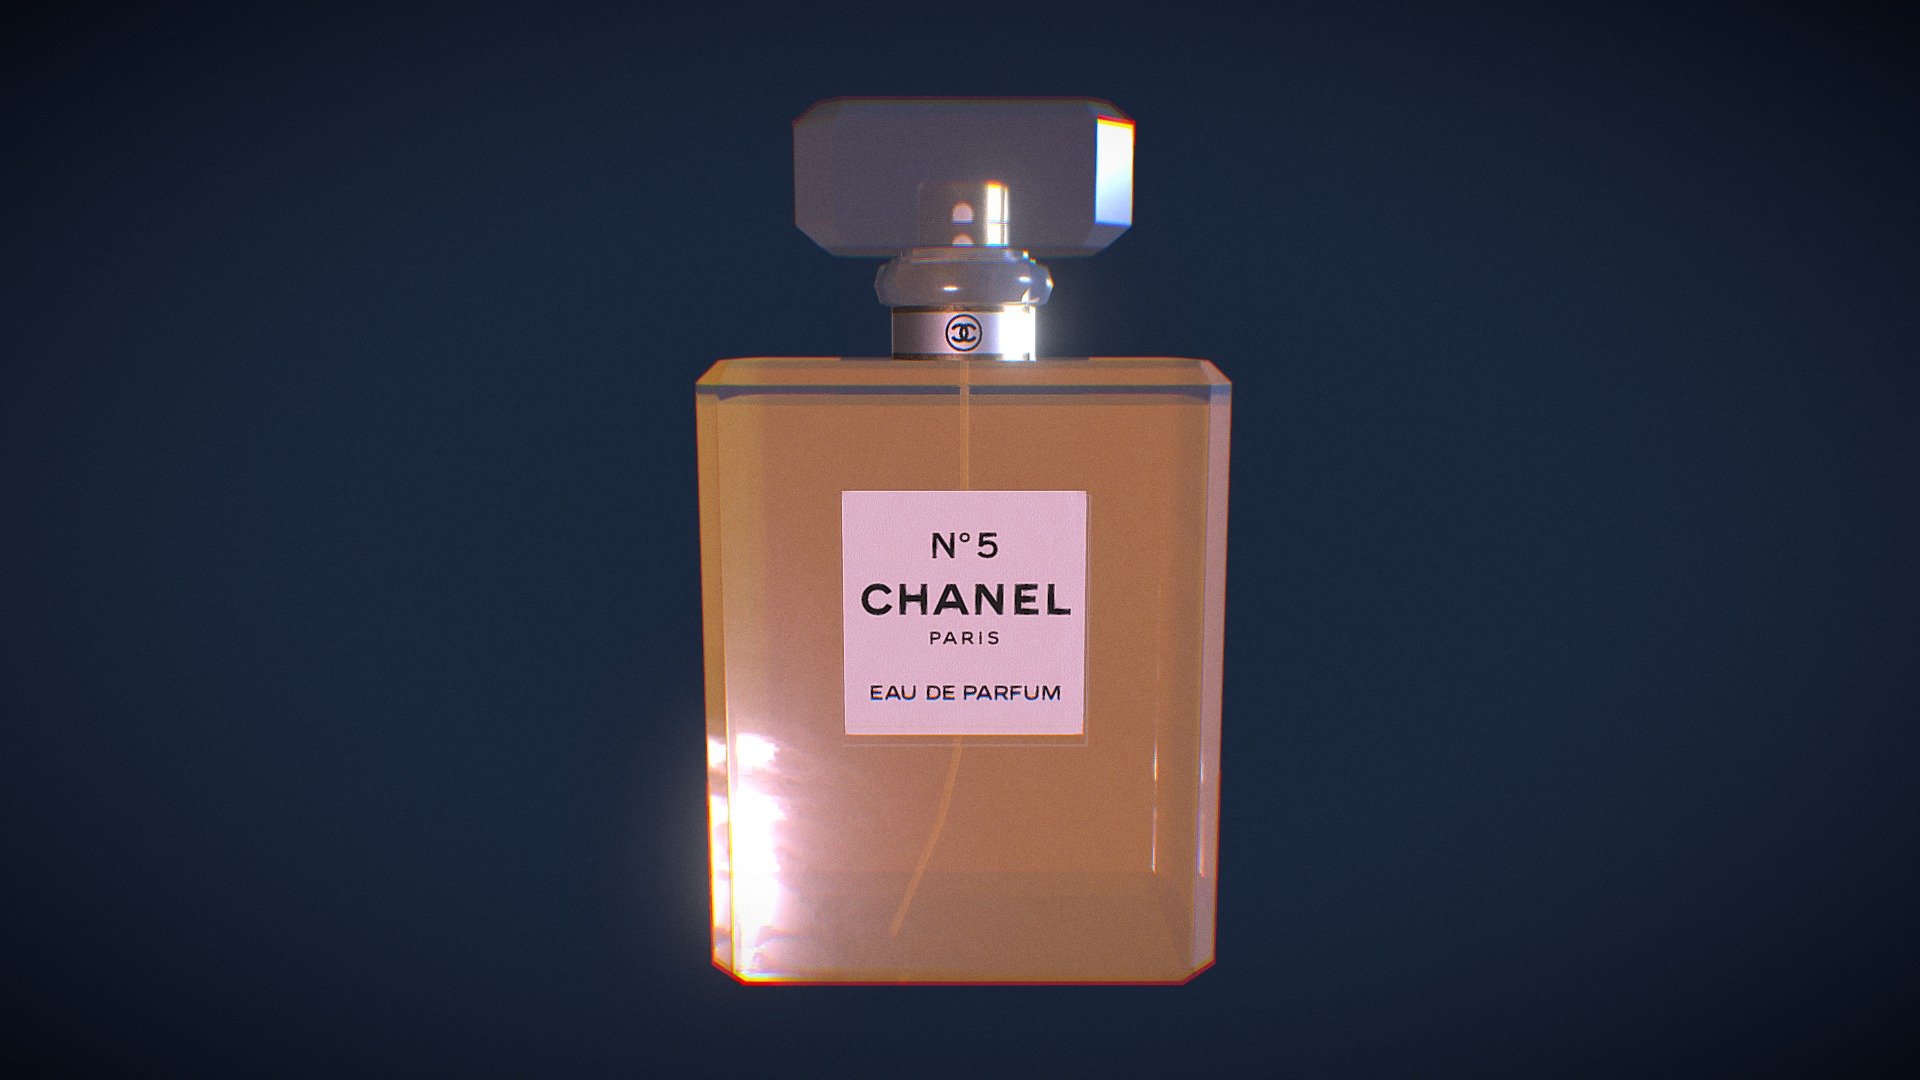 100 mL
Realistic low poly CHANEL PARFUMEUR
asset ready for gameEngine - Chanel Nº5 - 3D model by xtremelifestylx 3d model